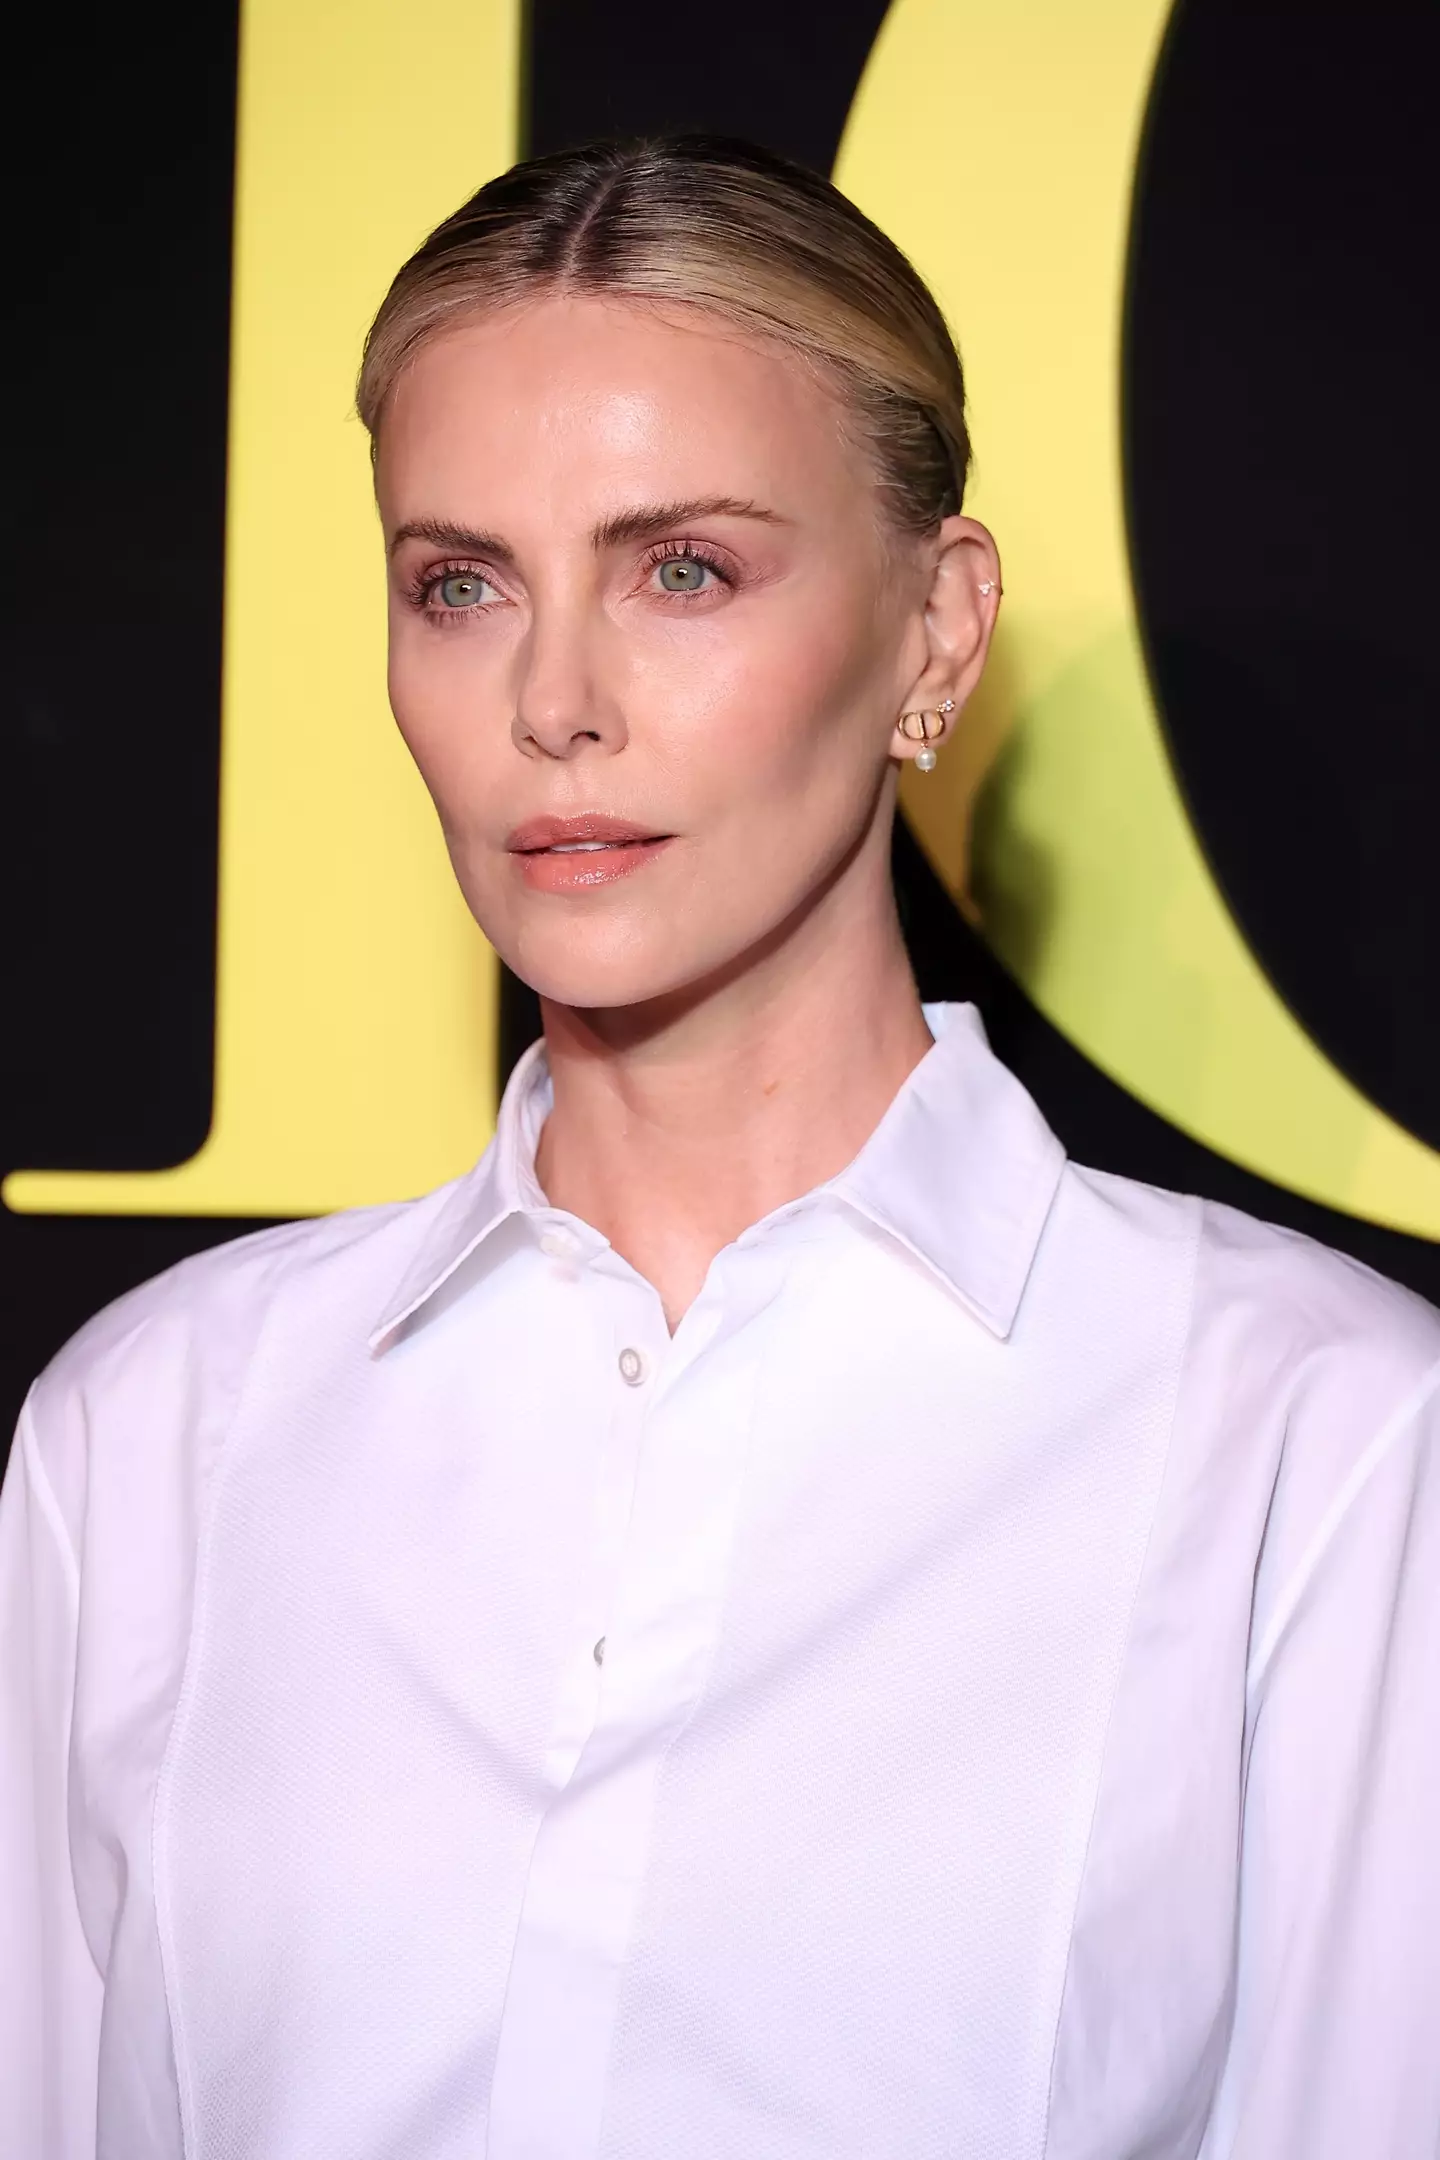 Charlize Theron was just 15 when the incident happened.